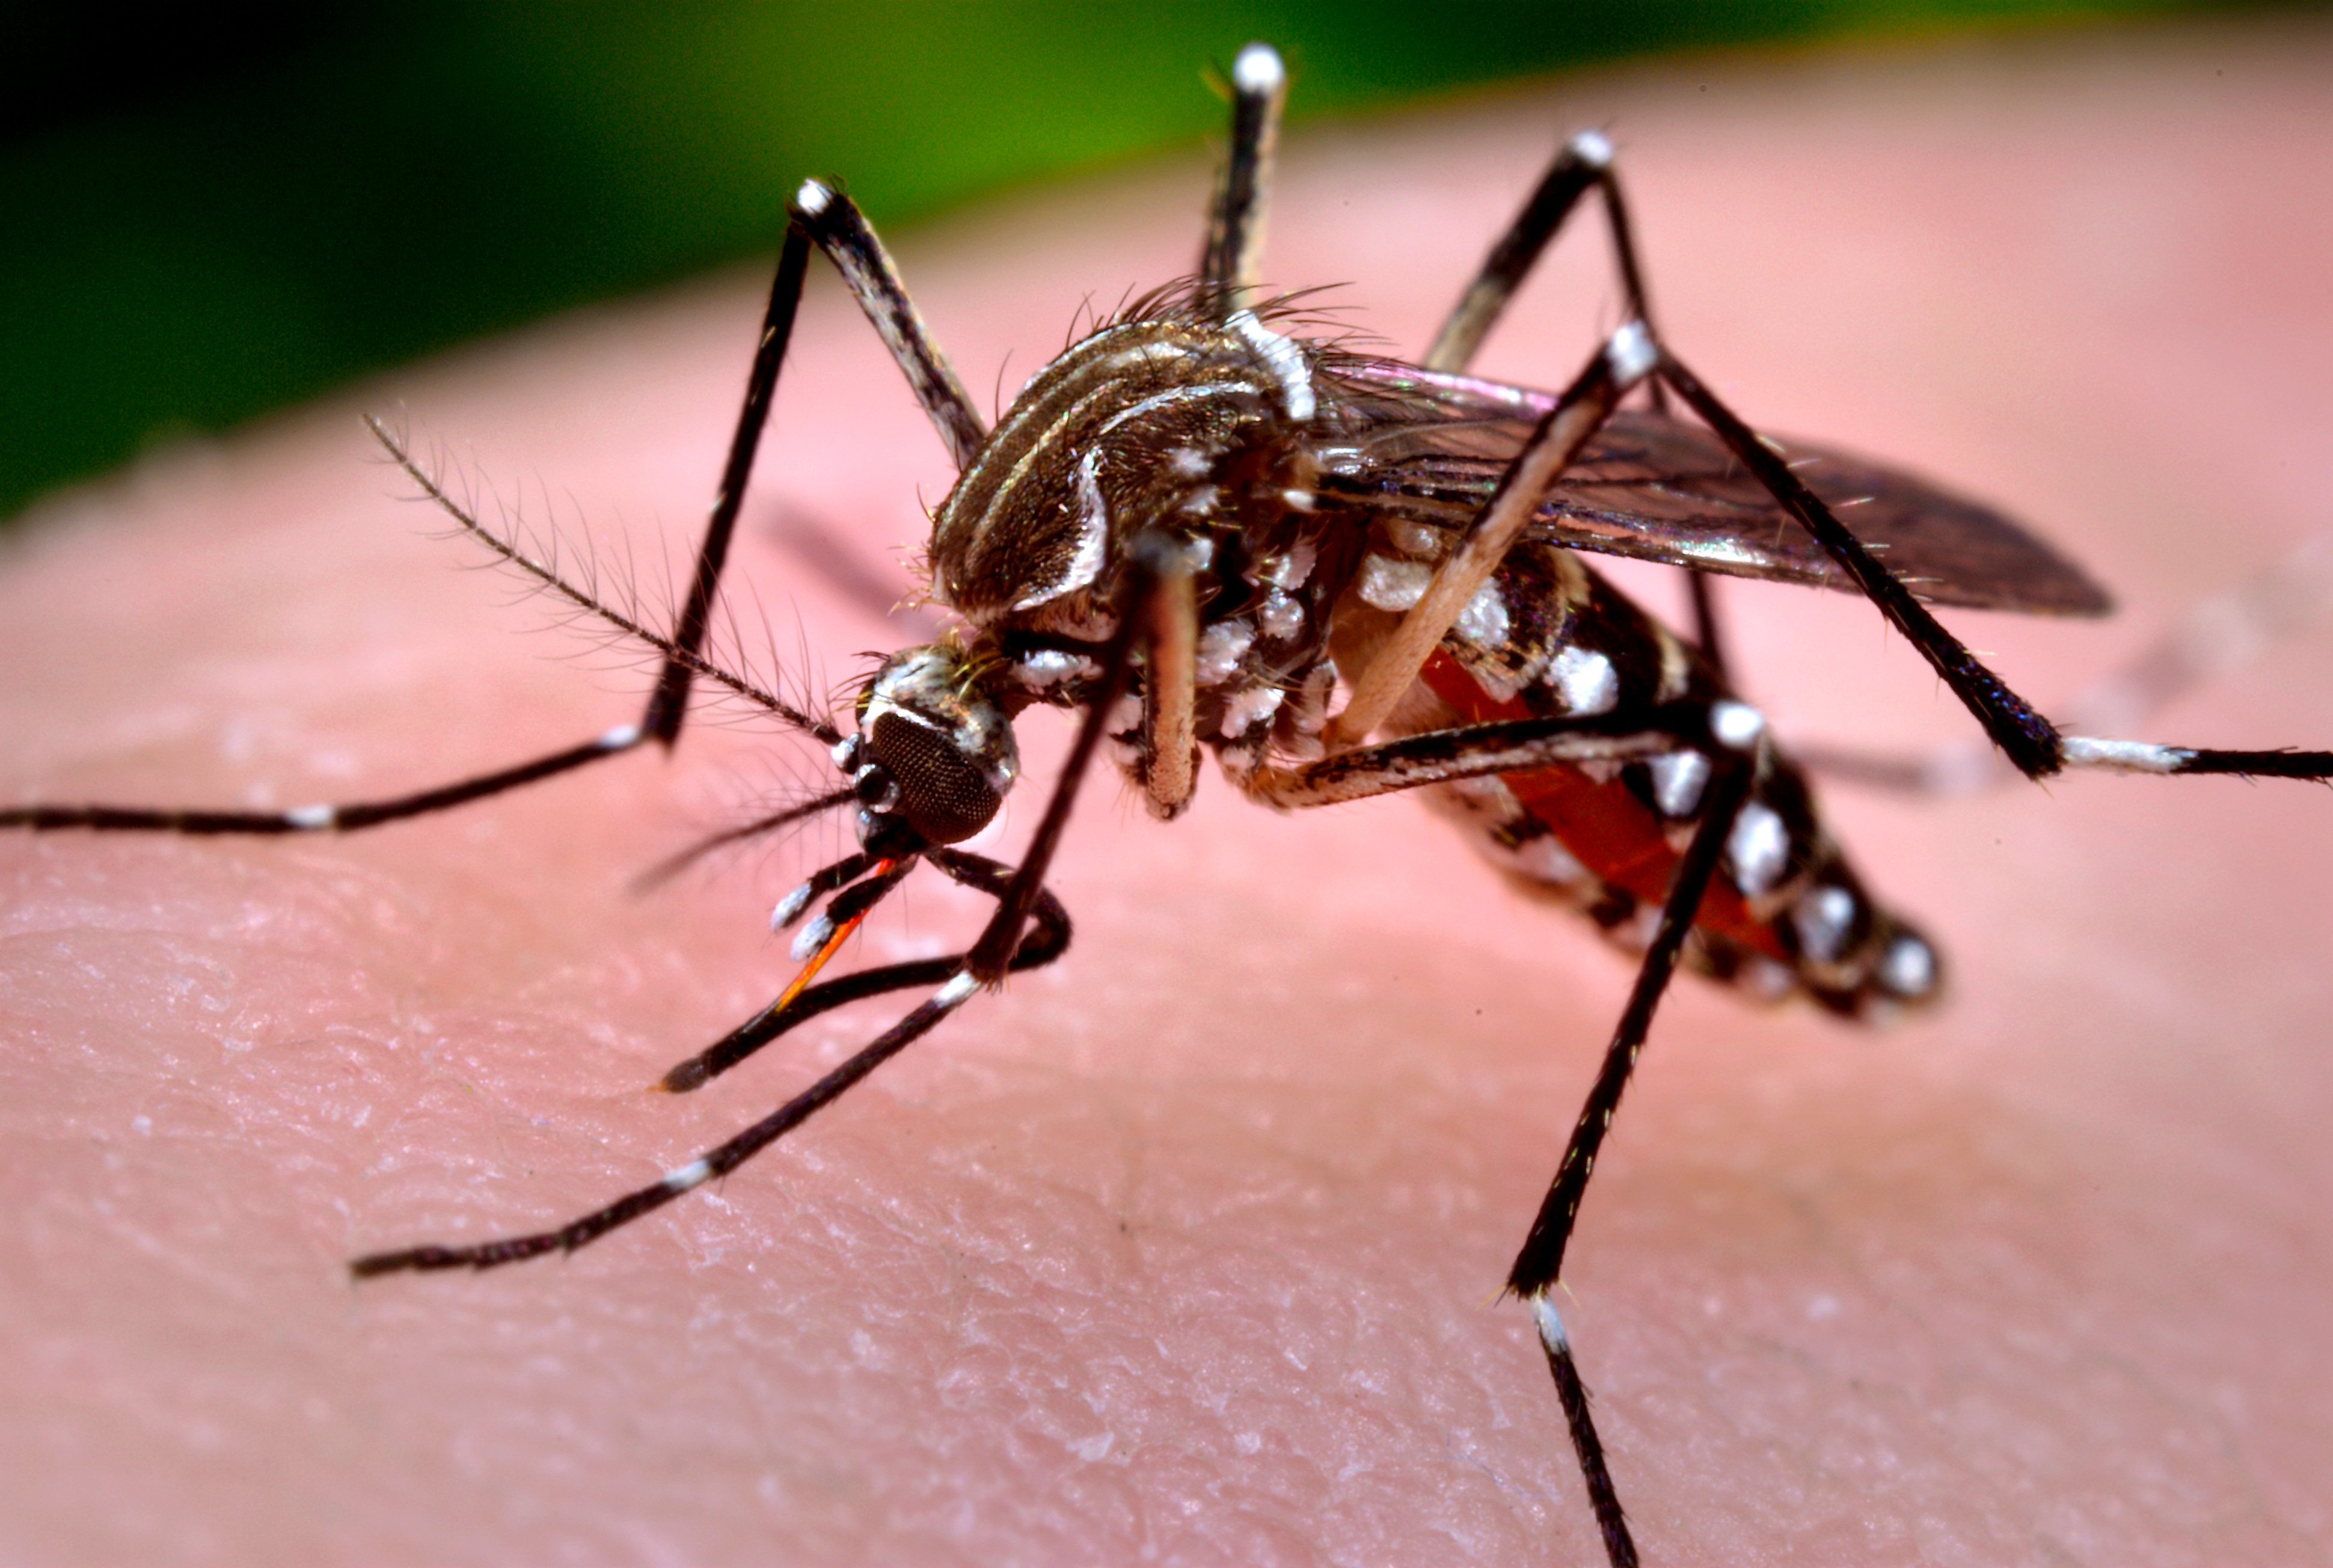 The West Nile virus is carried by mosquitos and transmitted by insect bites (source)